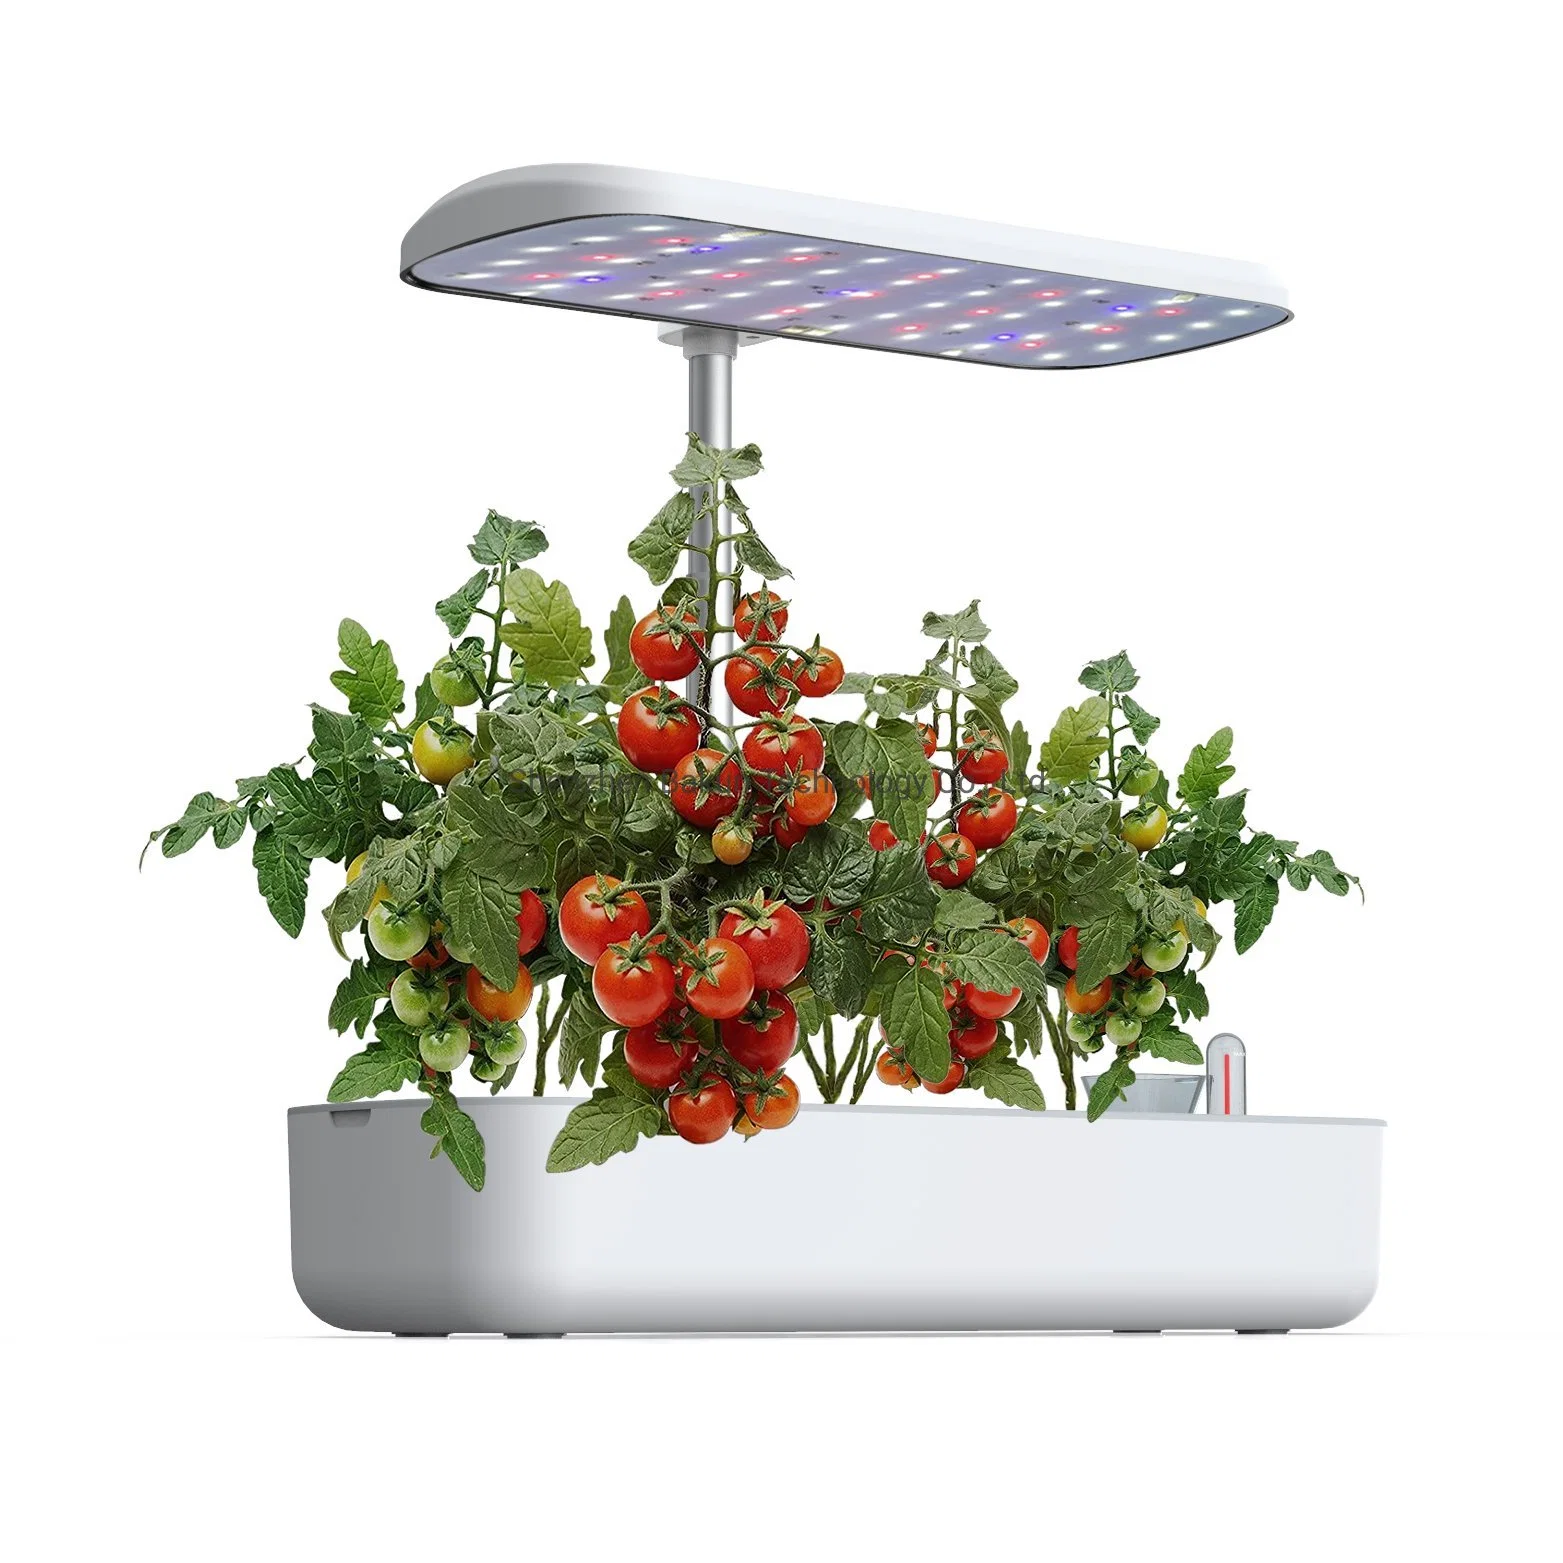 LED Spectrum Family Plant Vegetable Growth Intelligent Hydroponic Planting Hydroponic Planter System